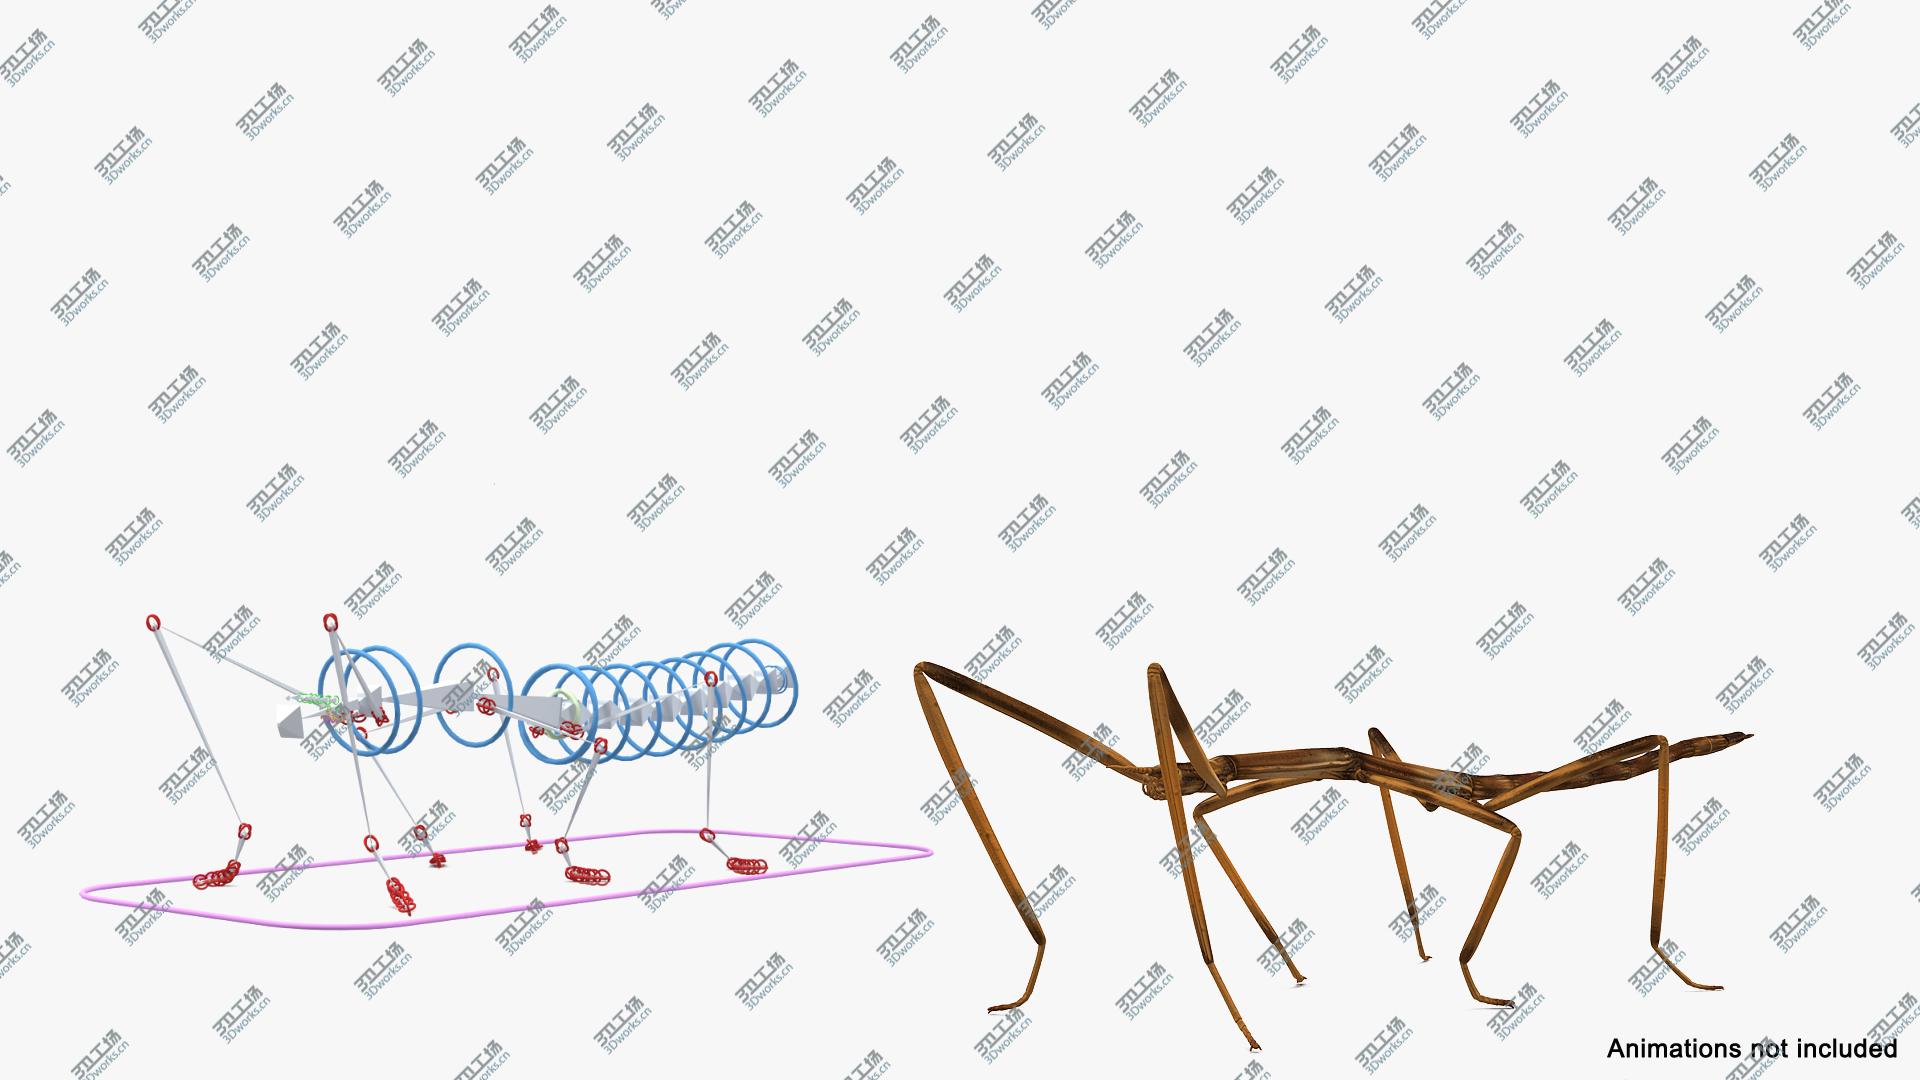 images/goods_img/2021040162/3D Stick Insect Brown Rigged model/4.jpg